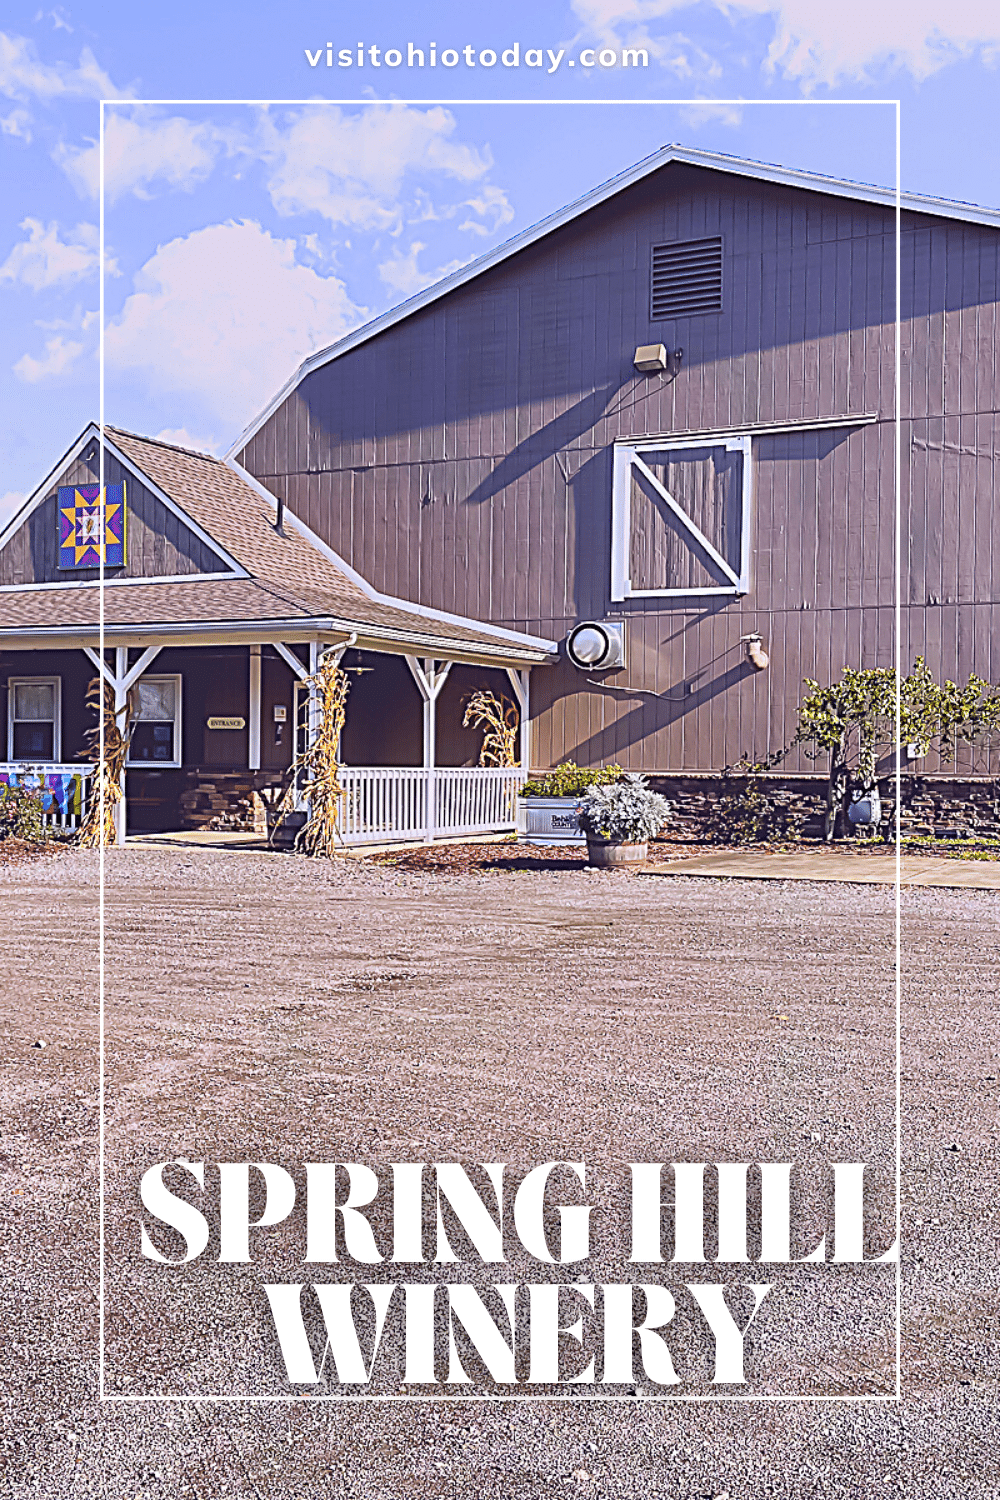 Spring Hill Winery is located in Geneva Ohio and offers a large selection of wines, wine slushies, craft beers, ciders and endless food options. 